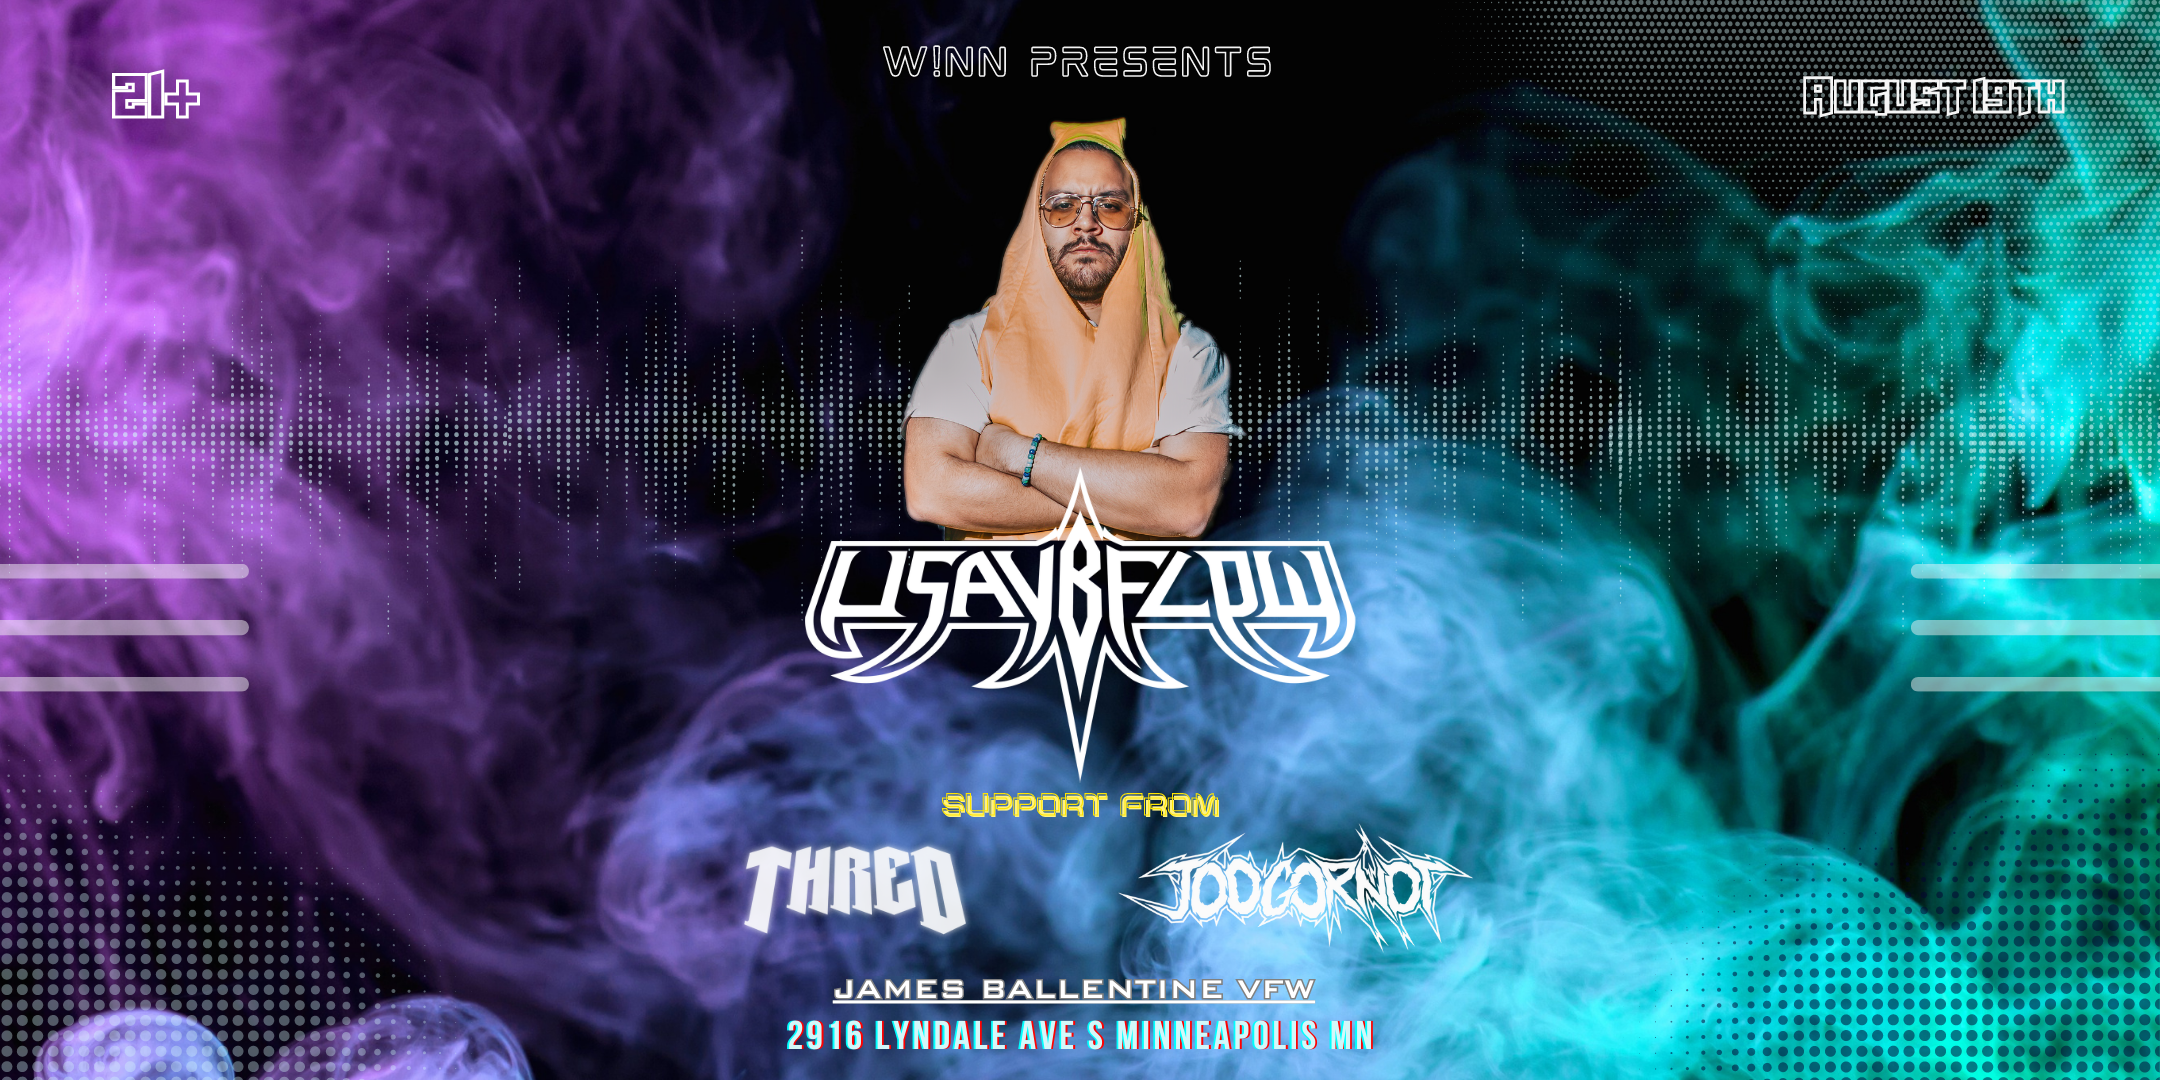 USAYBFLOW with THRED JOOGORNOT Saturday, August 19 James Ballentine "Uptown" VFW Post 246 Doors 9:00pm :: Music 9:00pm :: 21+ TICKETS: $20-$35